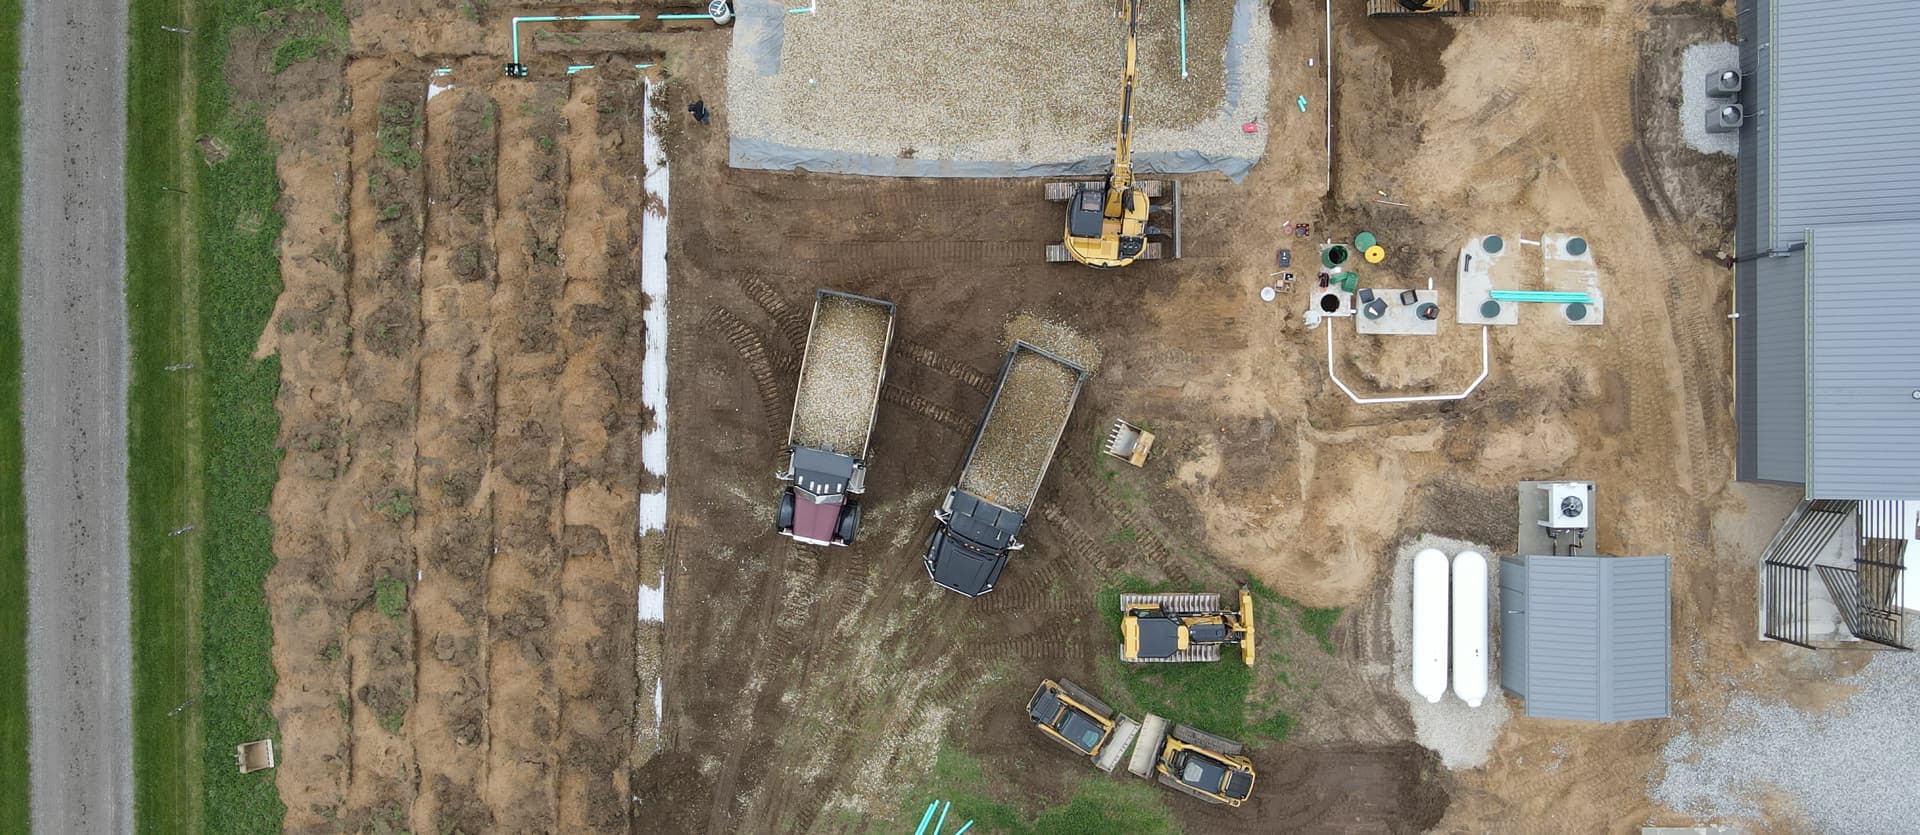 Aerial worksite, trucks and equipment